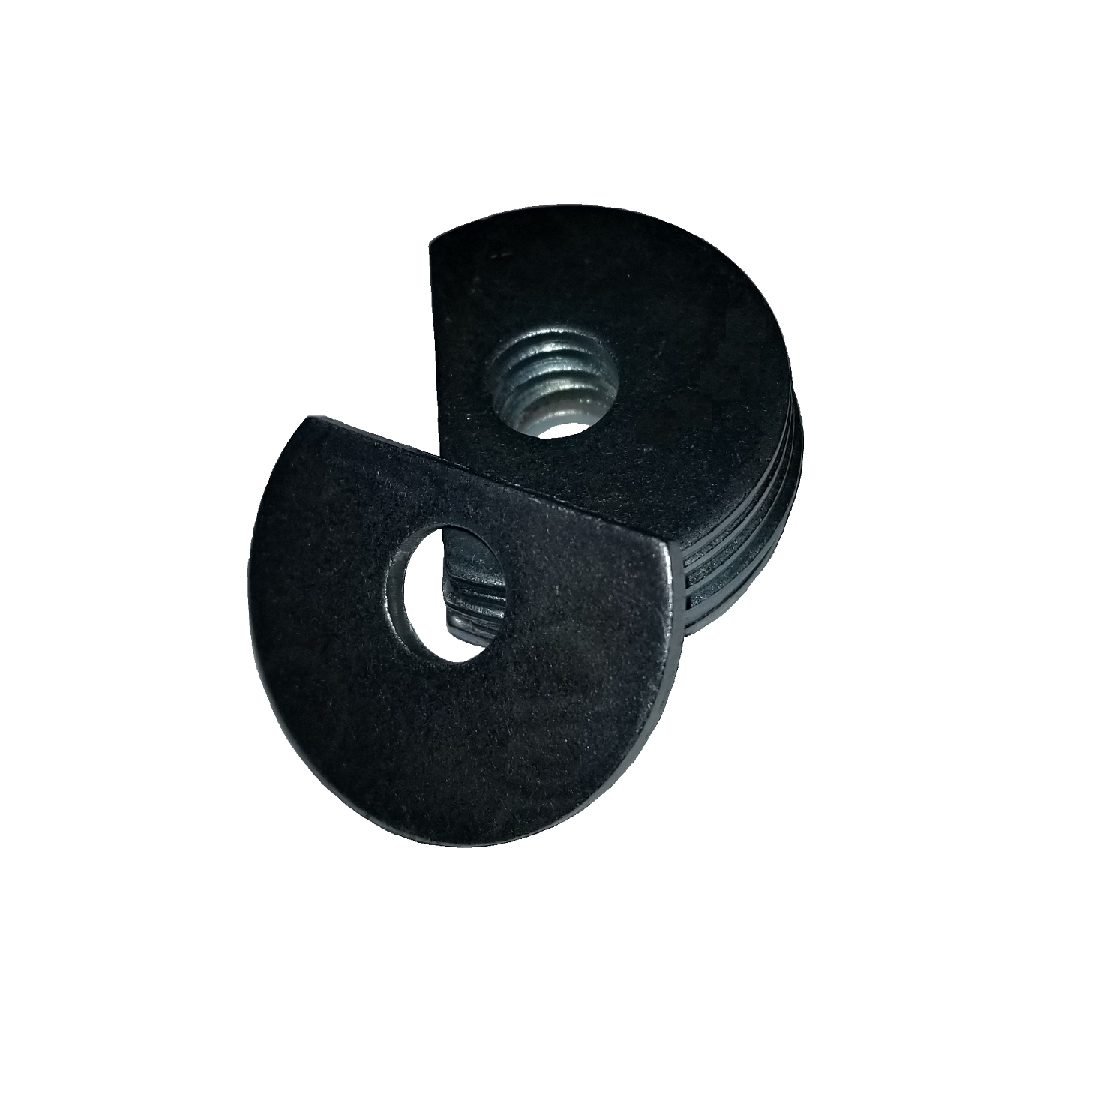 Clipped OD Washer - 0.135 ID, 0.312 OD, 0.032 Thick, Low Carbon Steel - Soft, Zinc & Clear